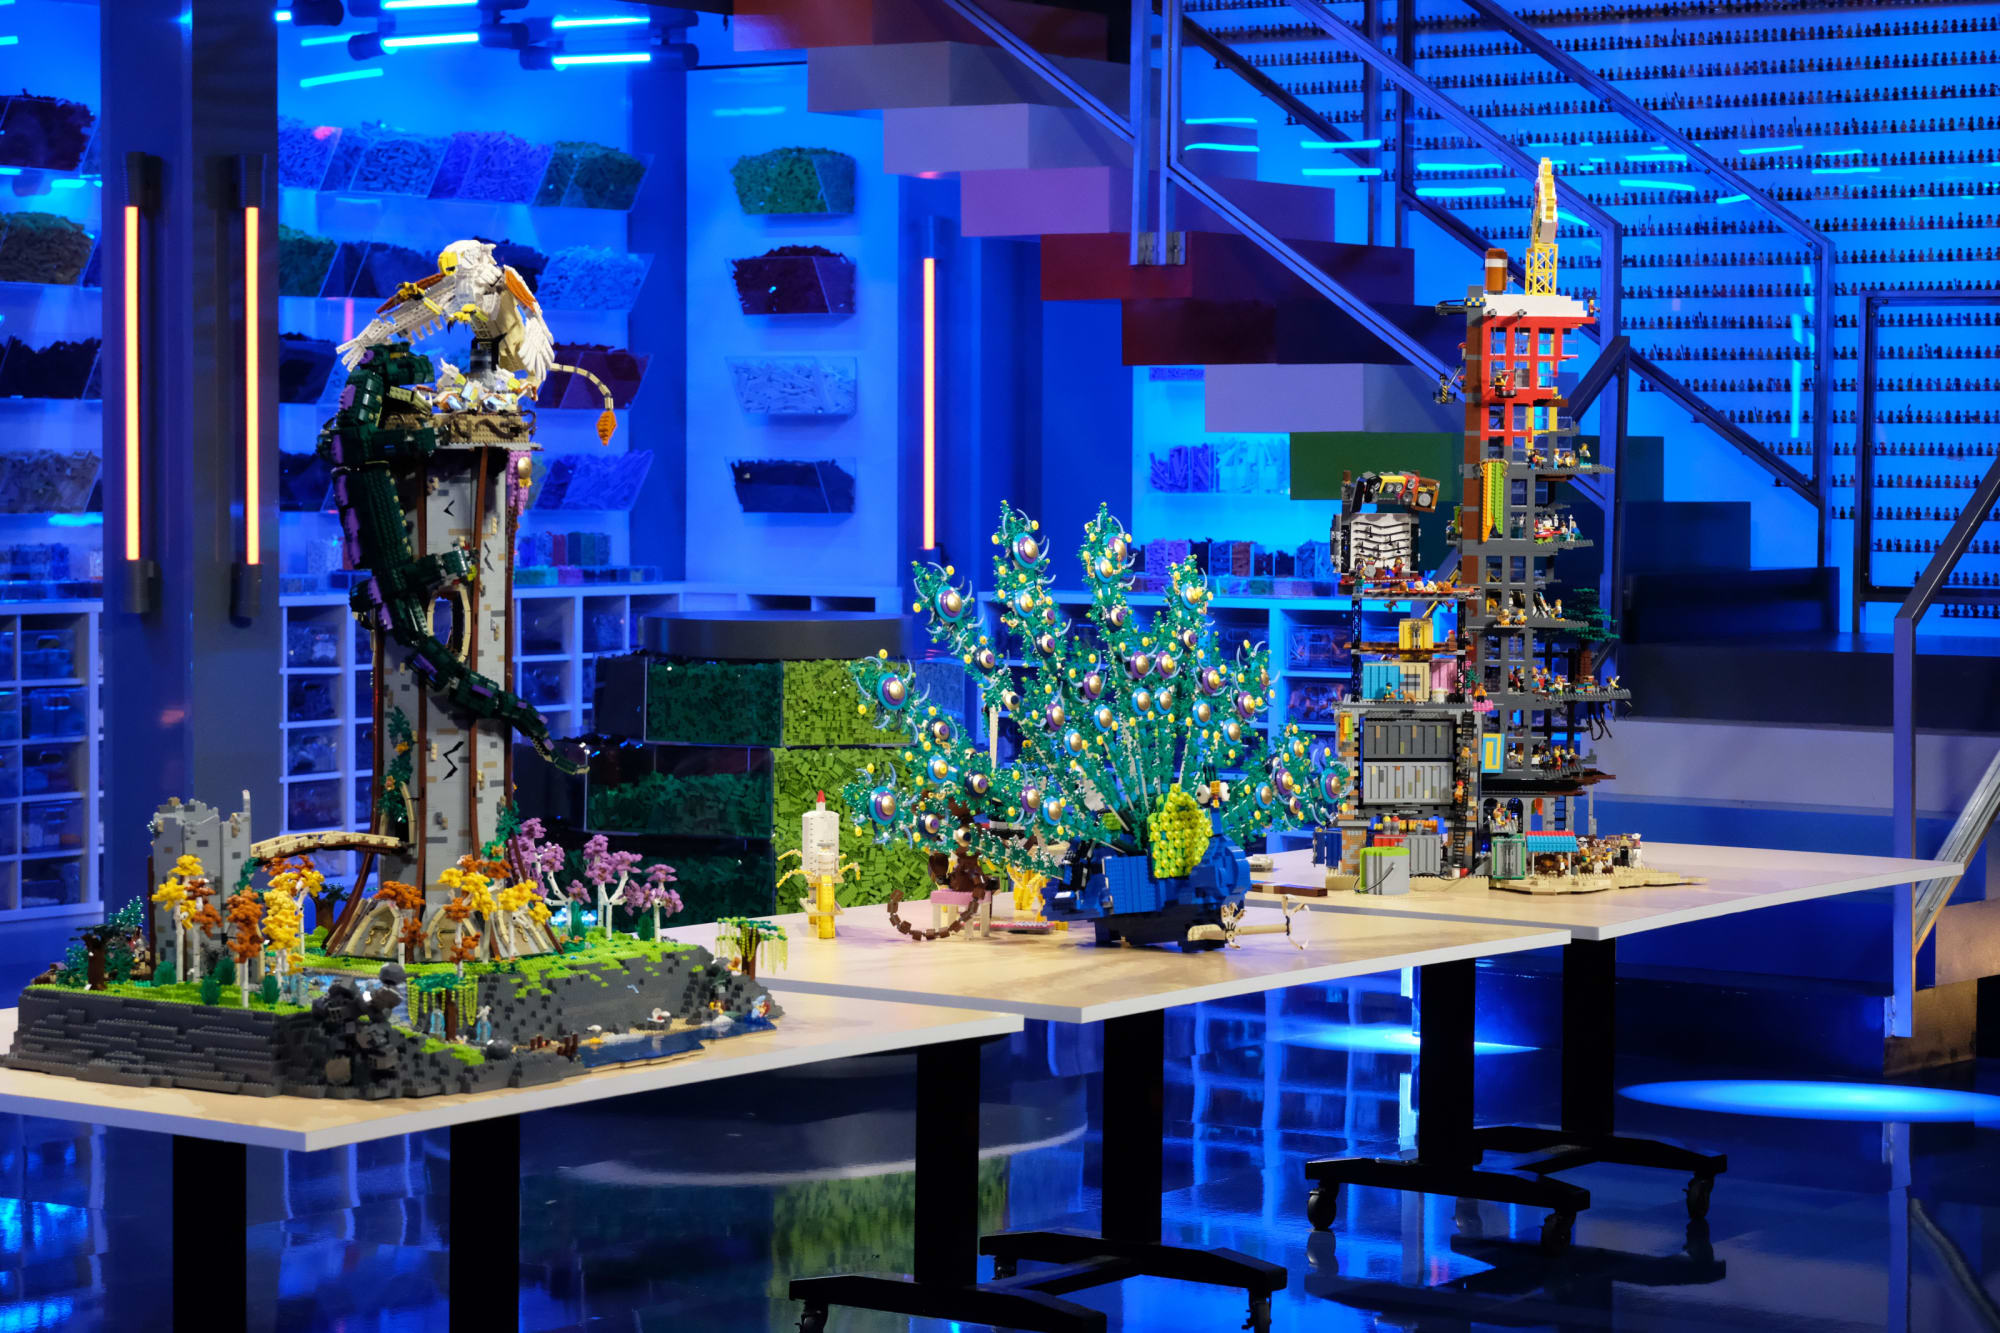 LEGO Masters season 2 premiere date, cast, and more